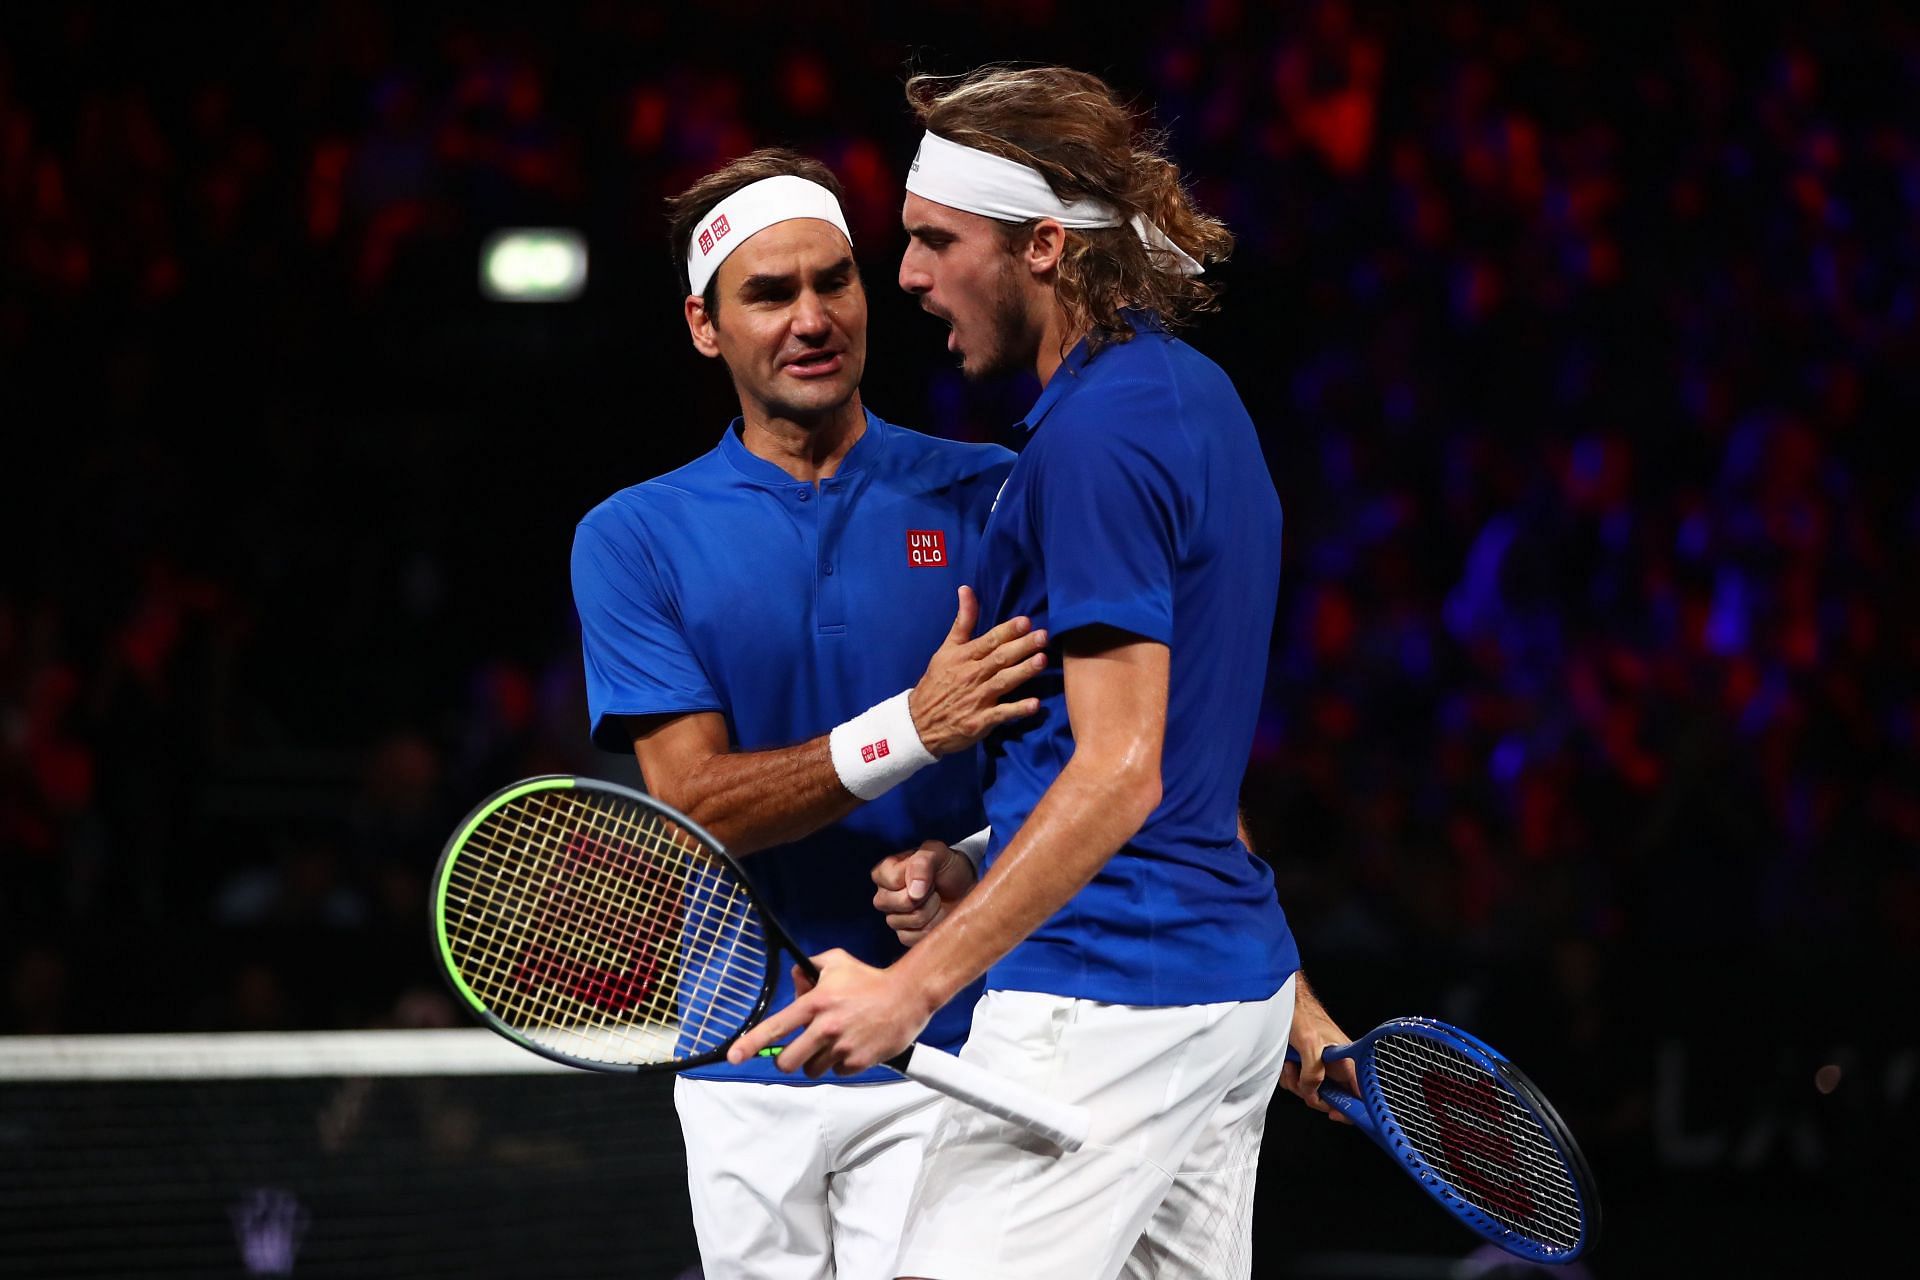 Roger Federer (L) and Stefanos Tsitsipas pictured at the 2019 Laver Cup.